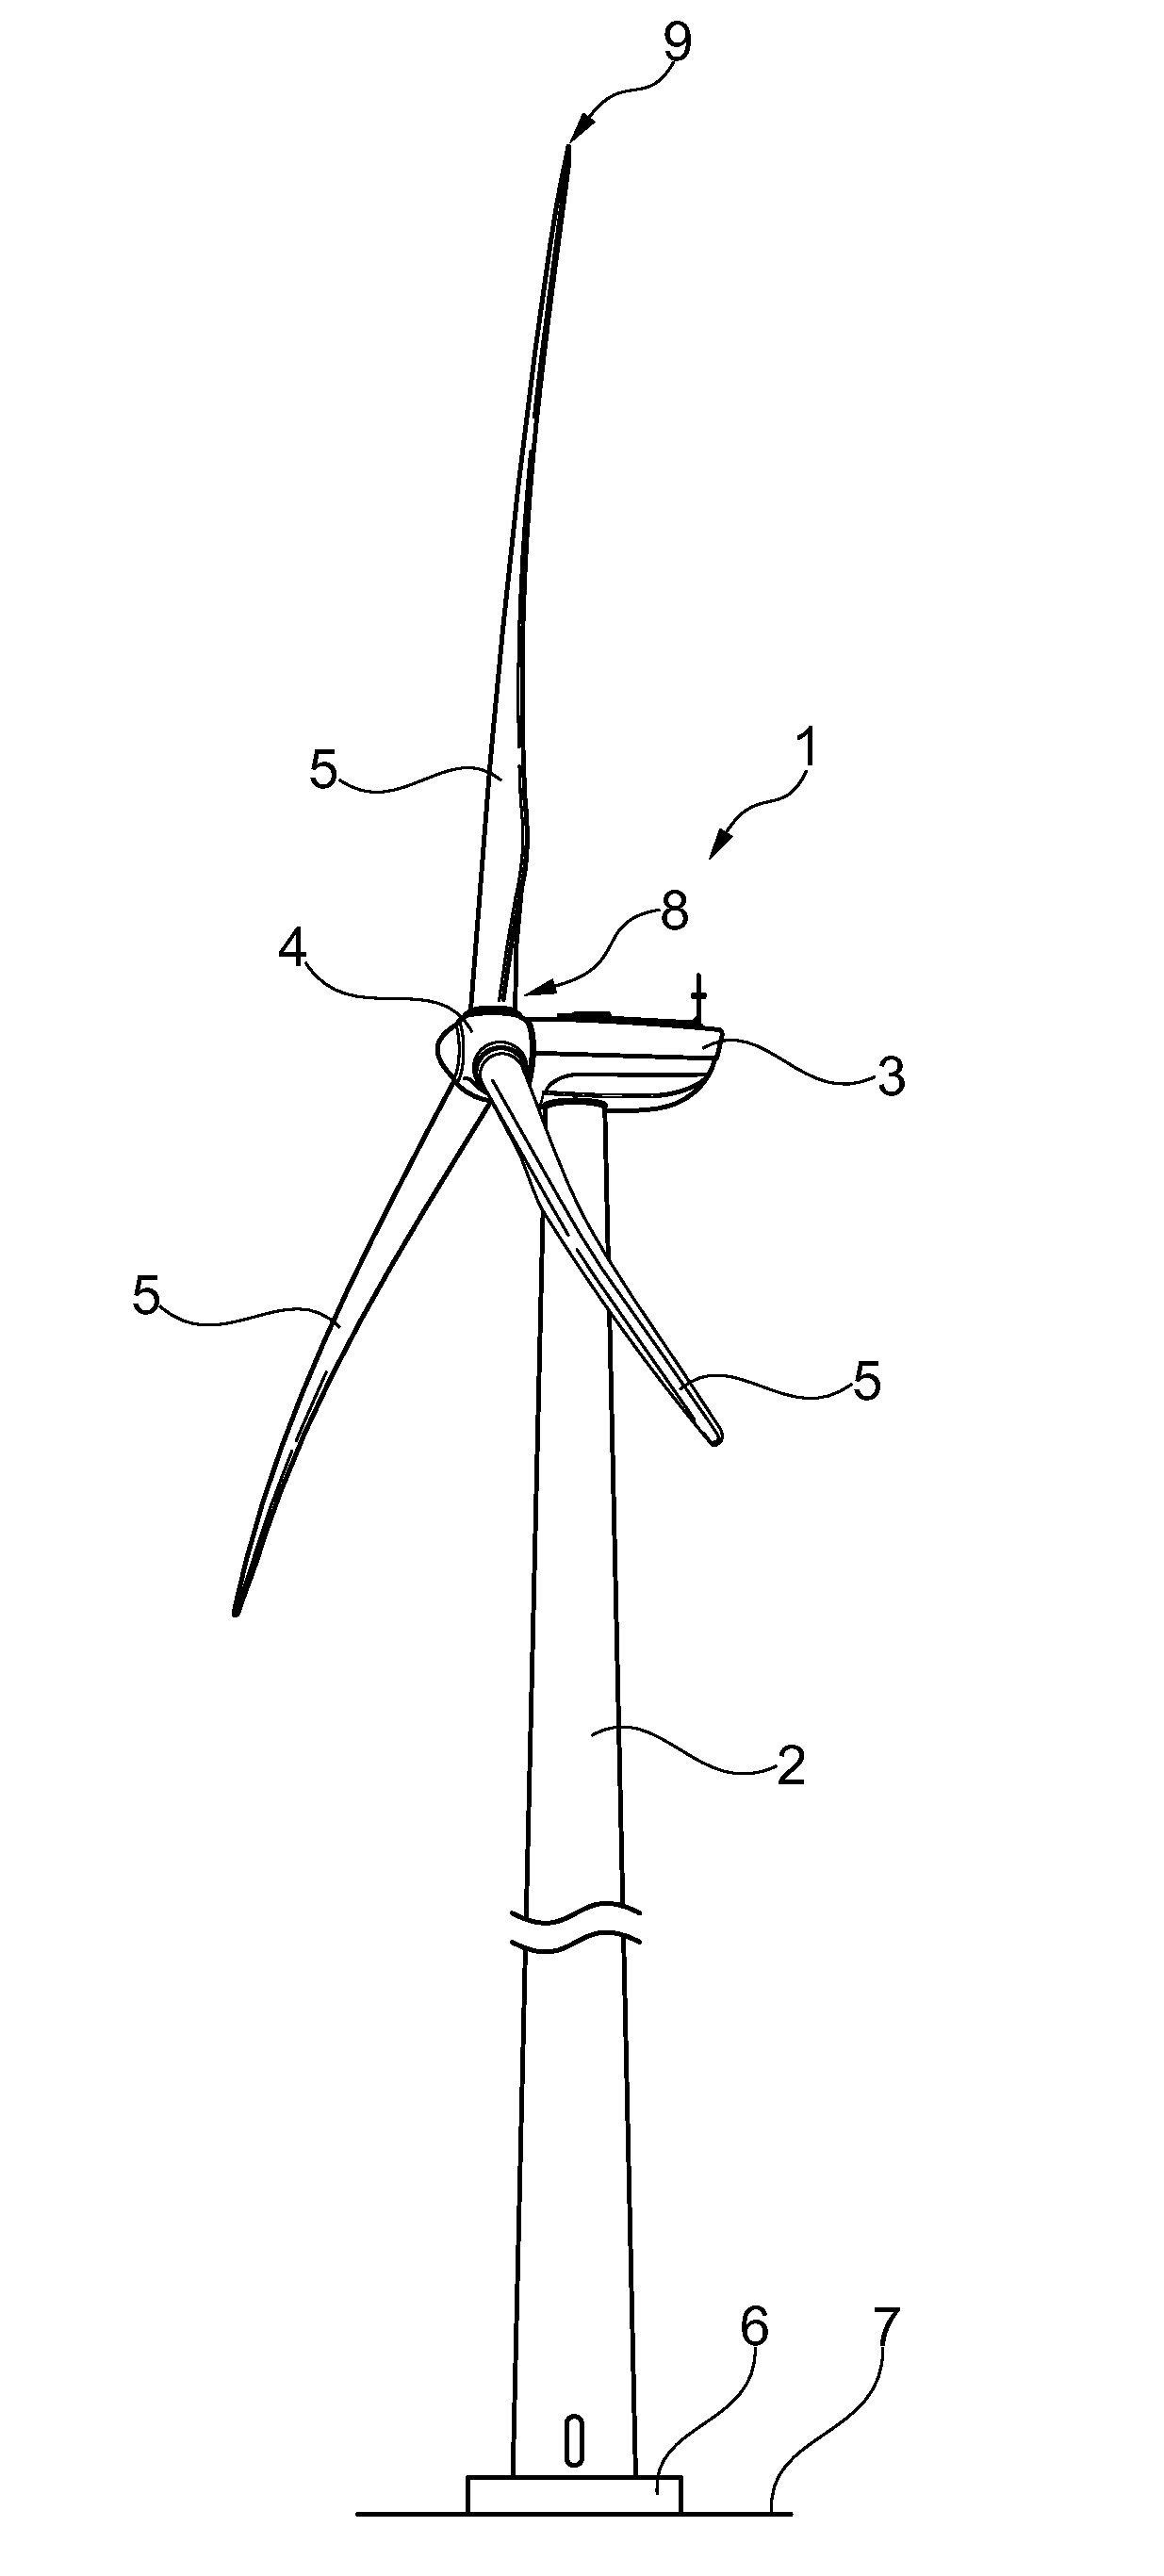 Wind turbine blade with extended shell section